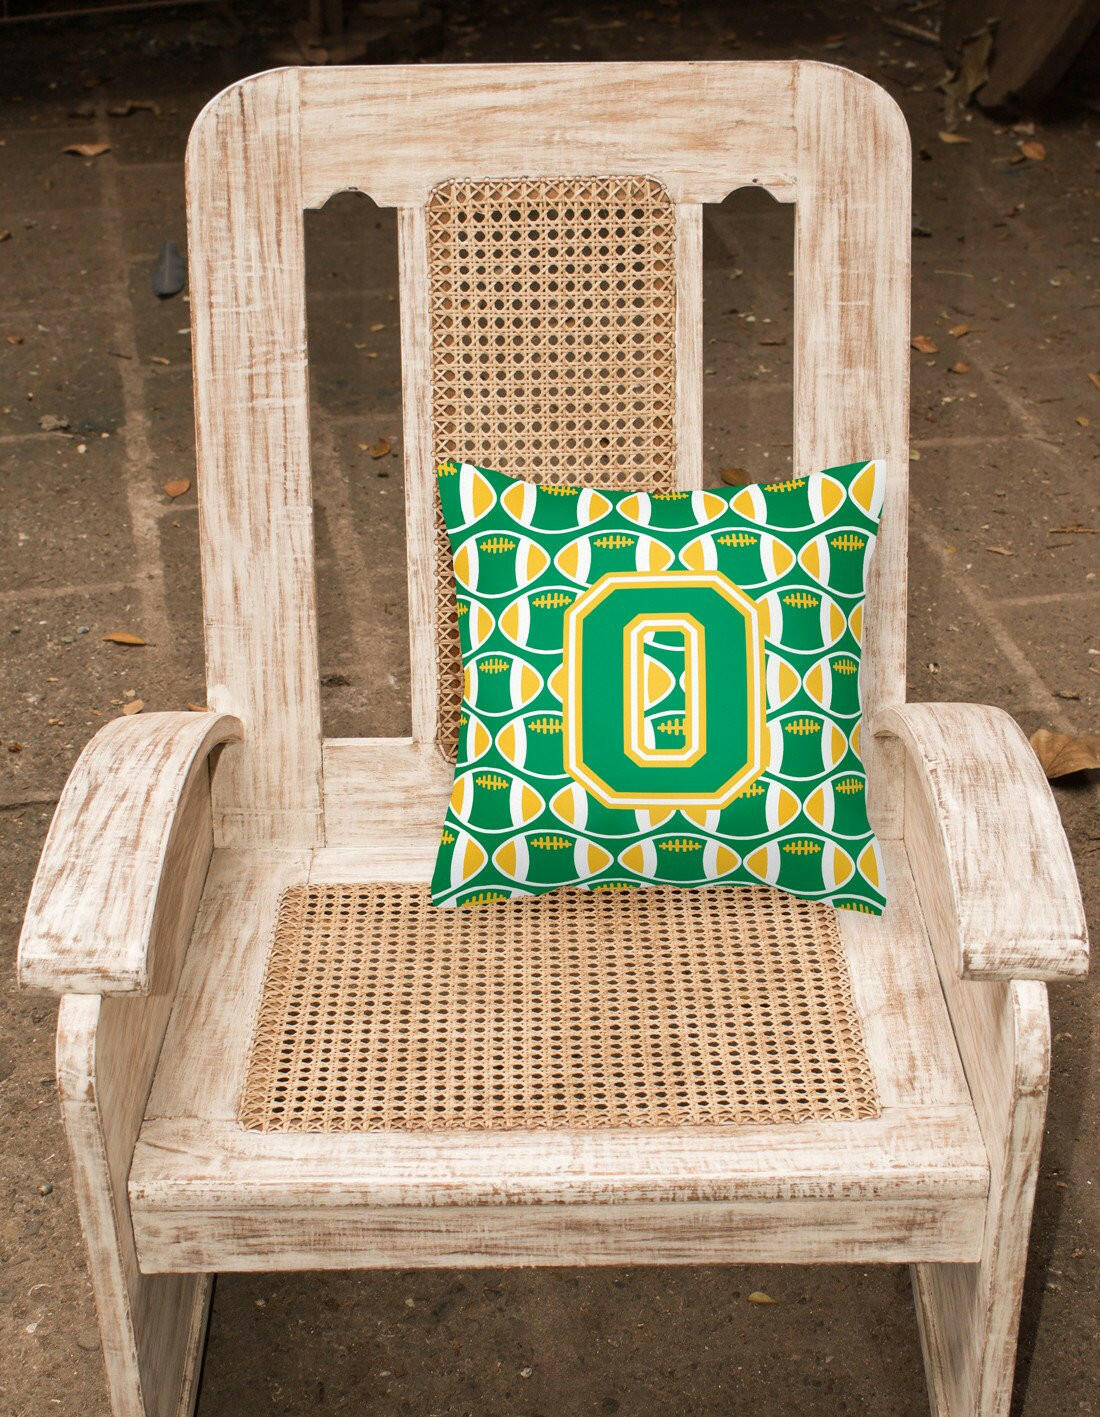 Letter O Football Green and Gold Fabric Decorative Pillow CJ1069-OPW1414 by Caroline's Treasures